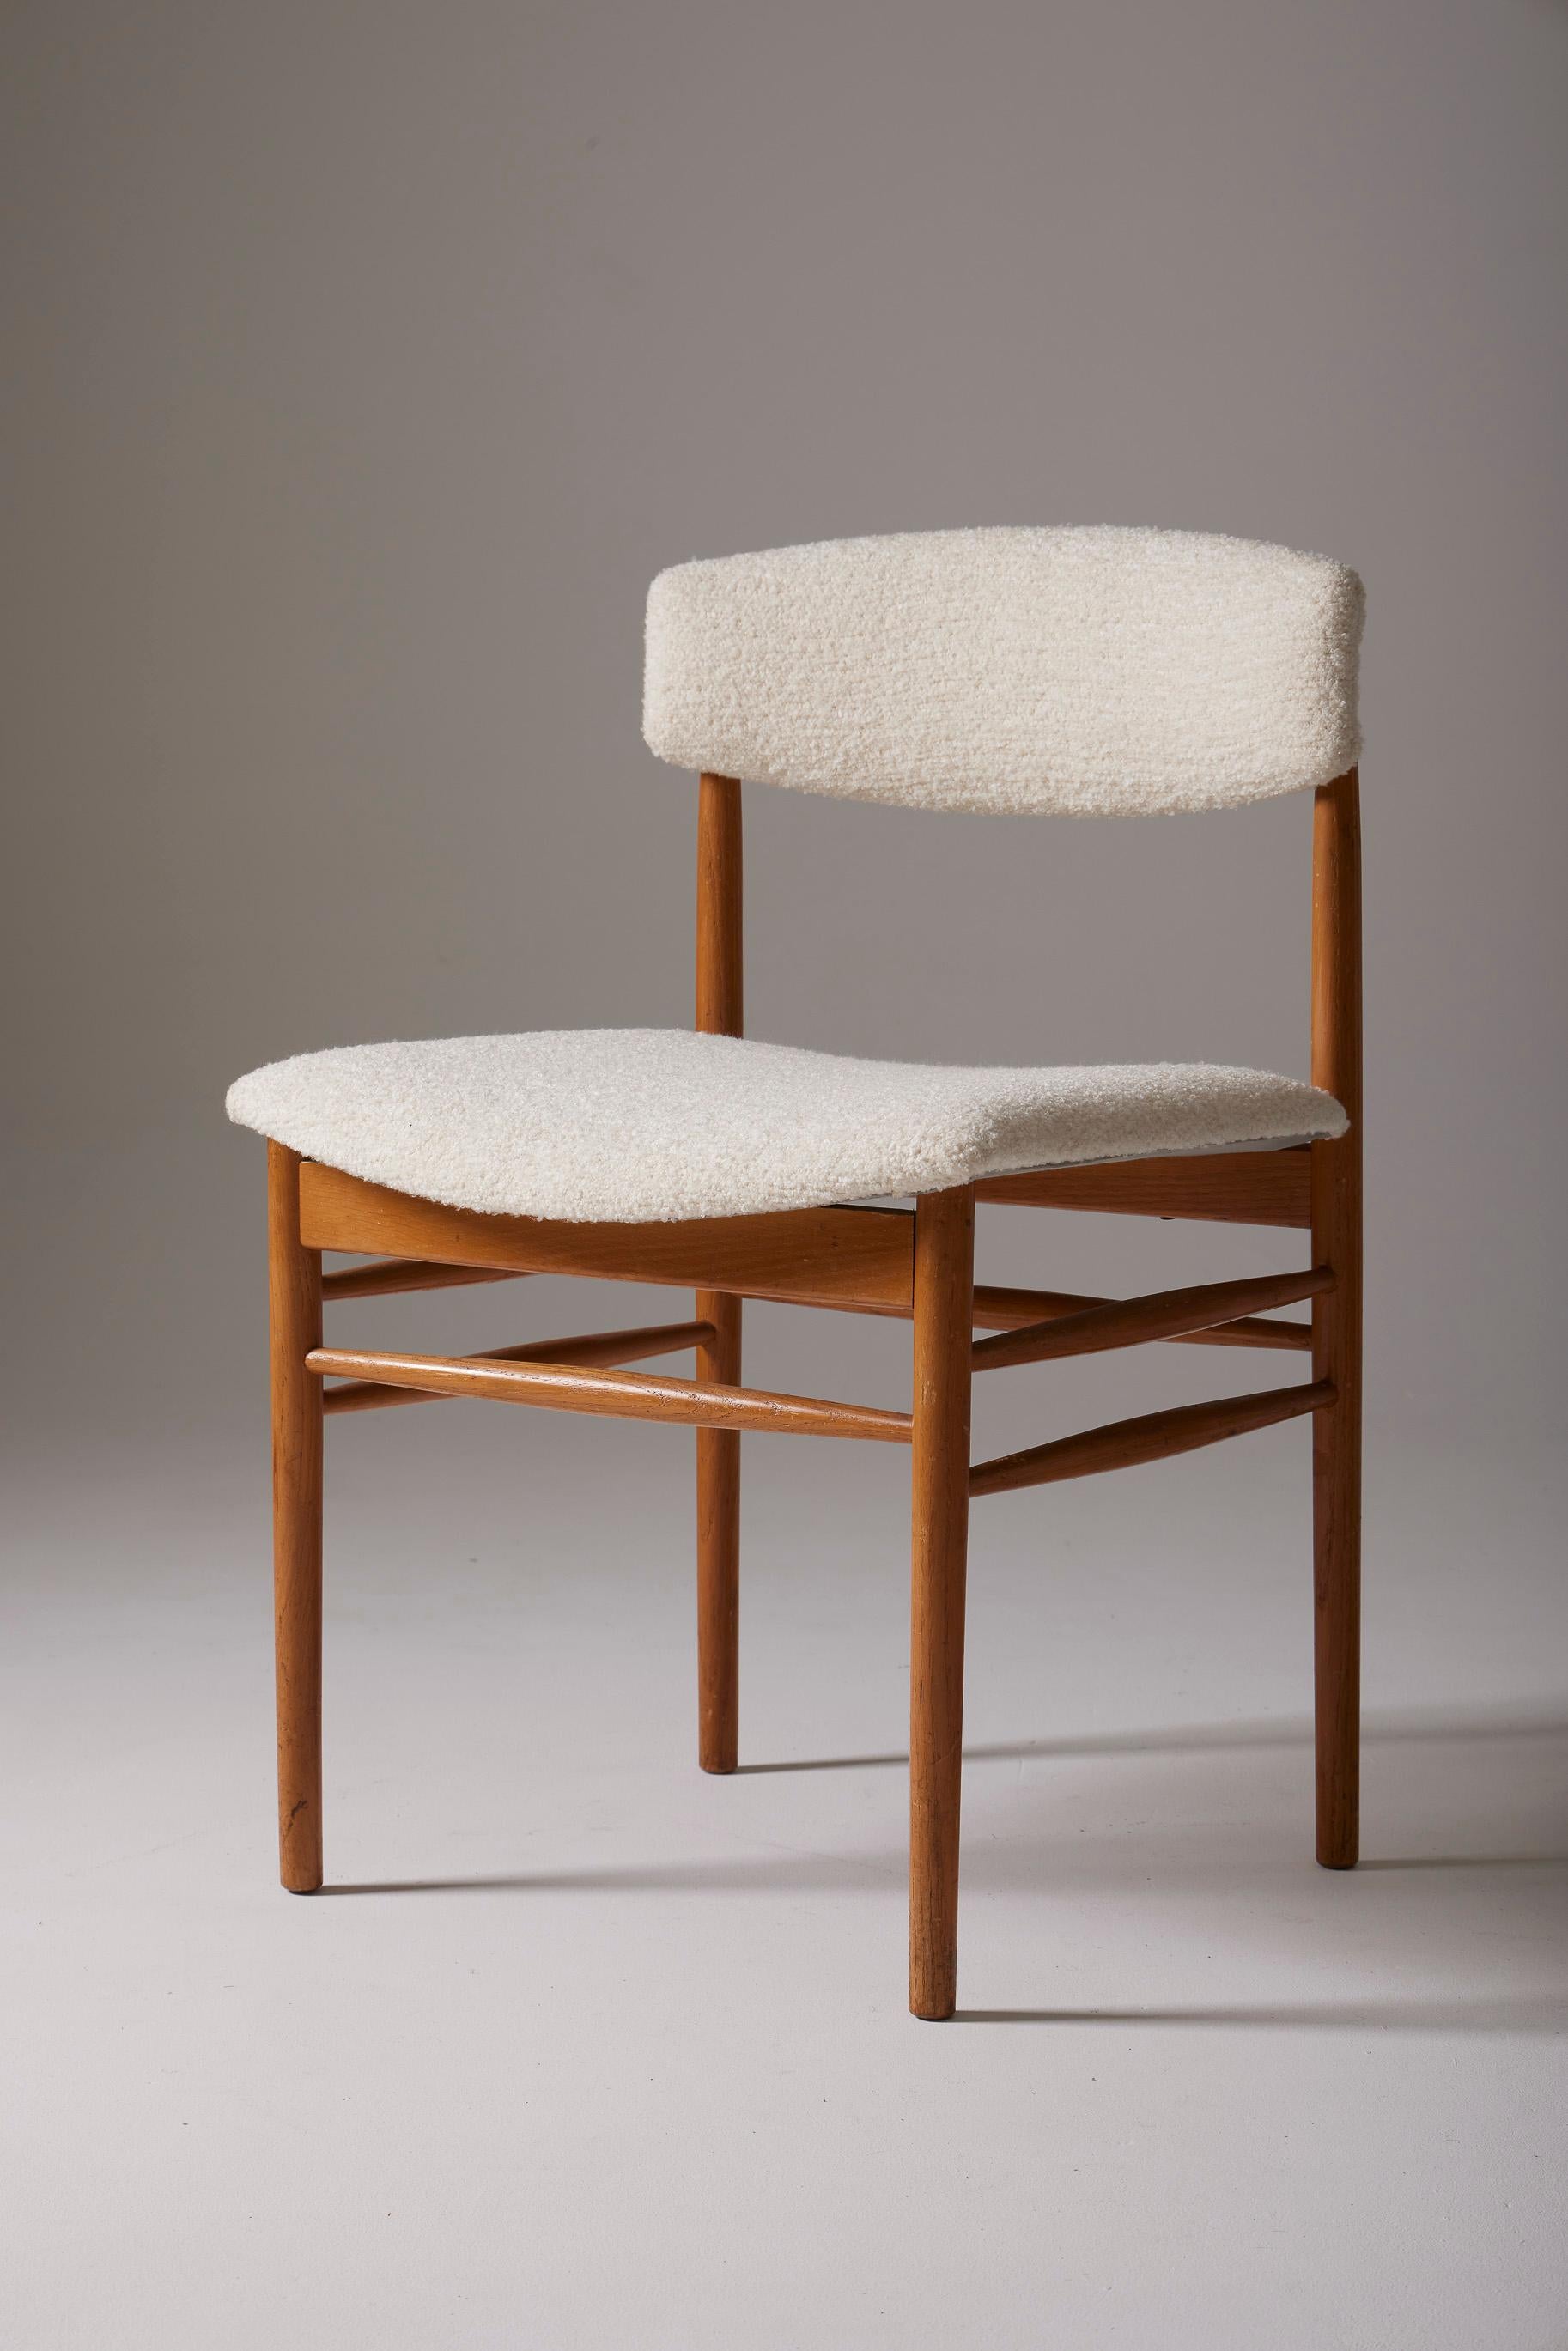  Set of 4 Scandinavian-style chairs, the seat and backrest have been reupholstered with high-quality white bouclé fabric and a wooden frame. In very good condition.
DV219